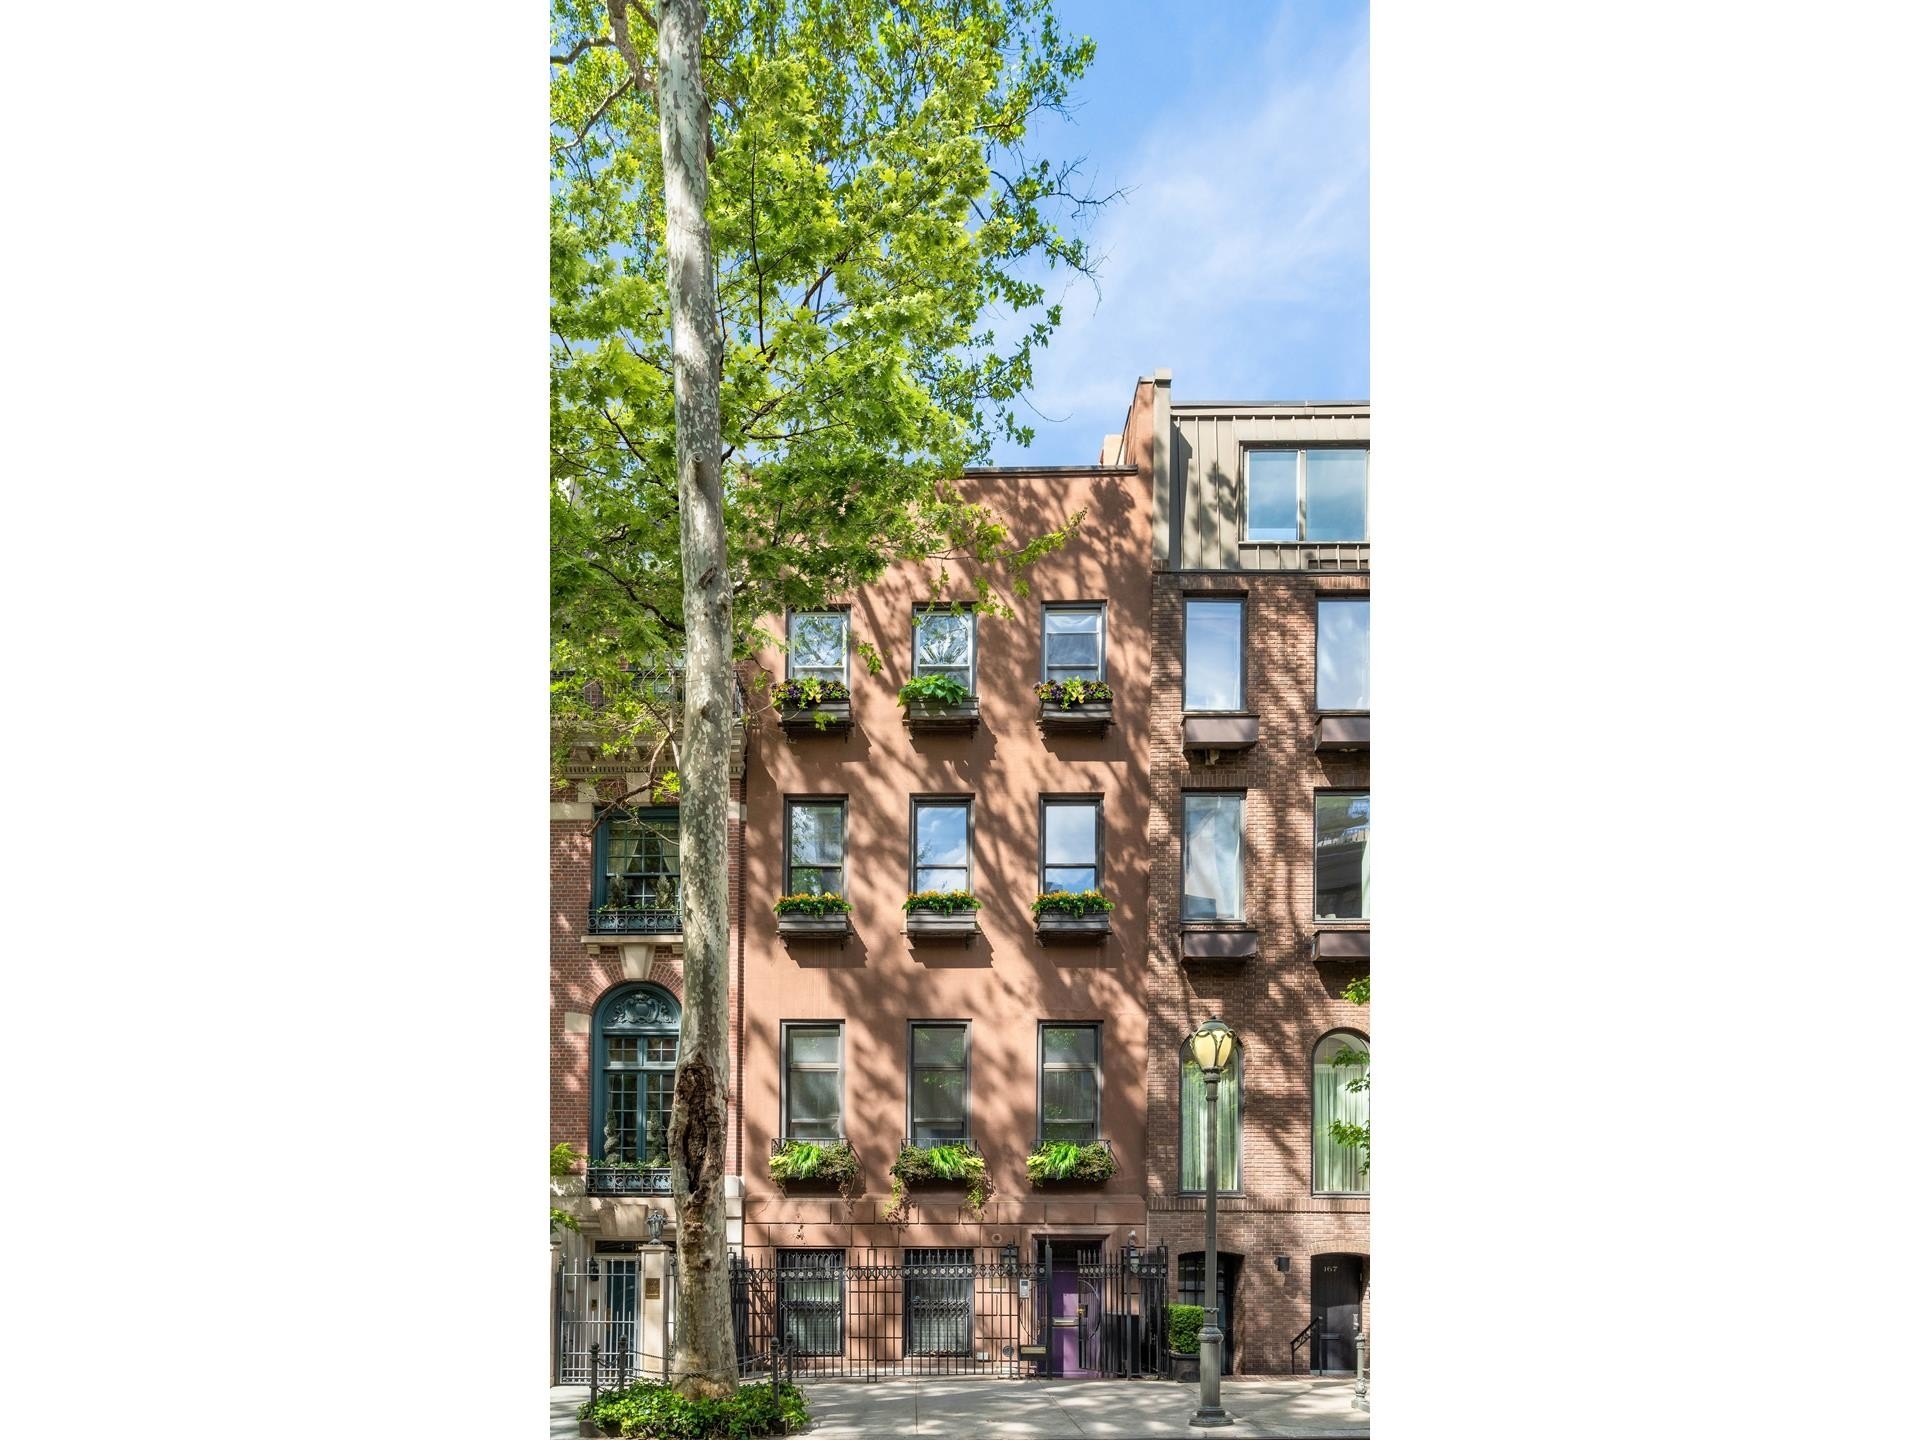 Multi Family Townhouse for Sale at 165 E 64TH ST, TOWNHOUSE Lenox Hill, New York, New York 10065